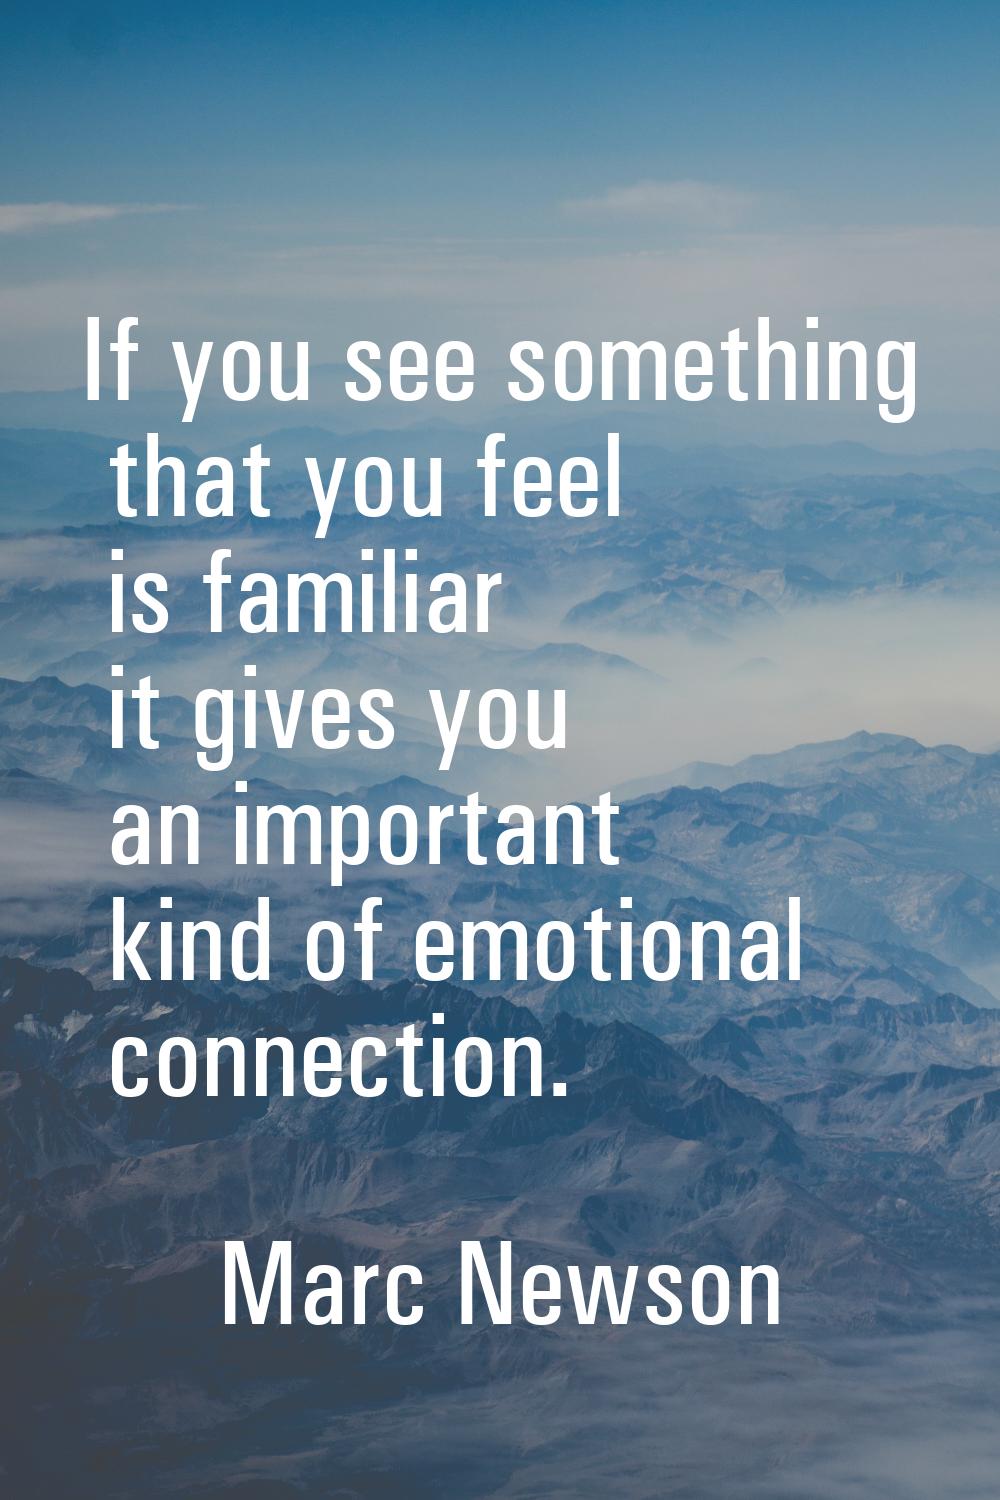 If you see something that you feel is familiar it gives you an important kind of emotional connecti